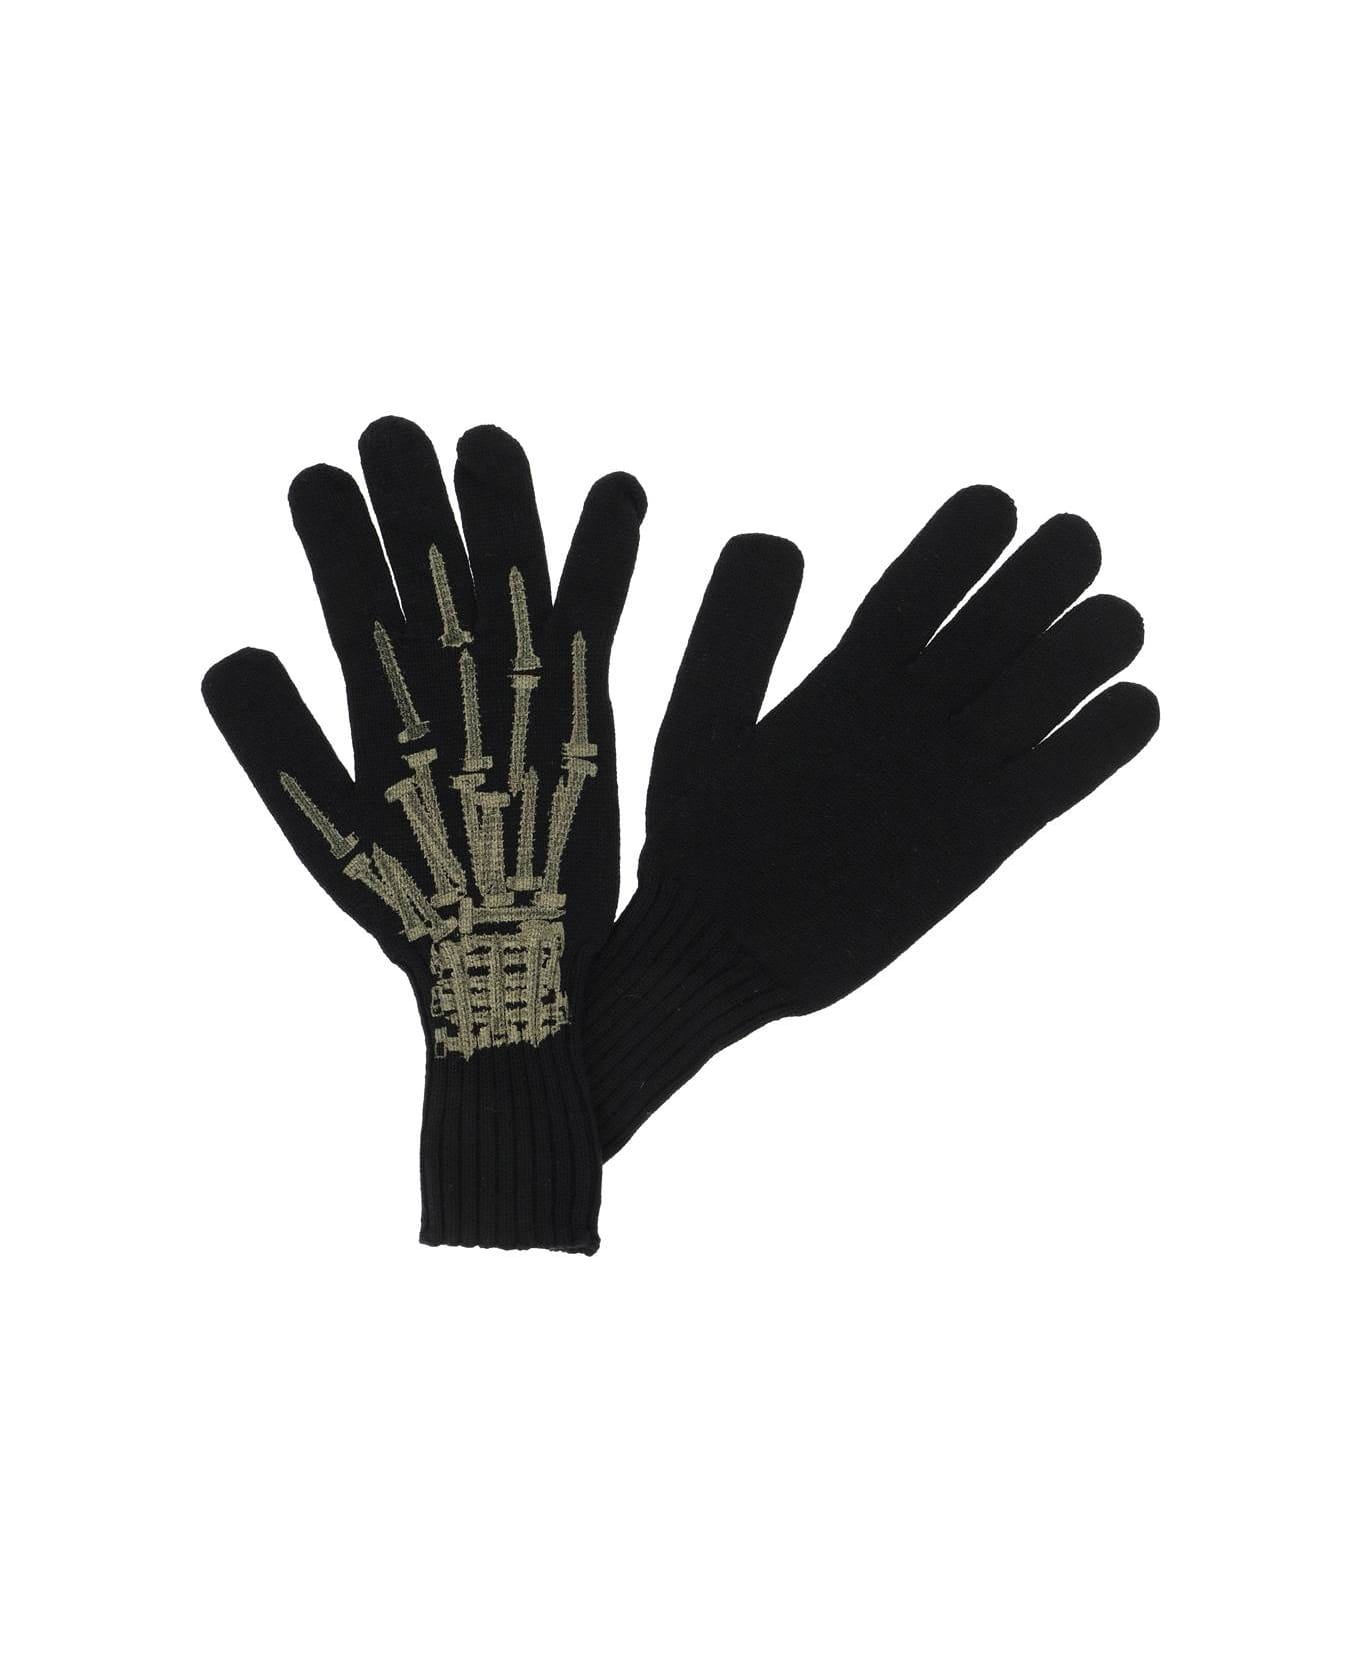 44 Label Group Wool Gloves With Print - BLACK HAND STUDS PRINT (Black)